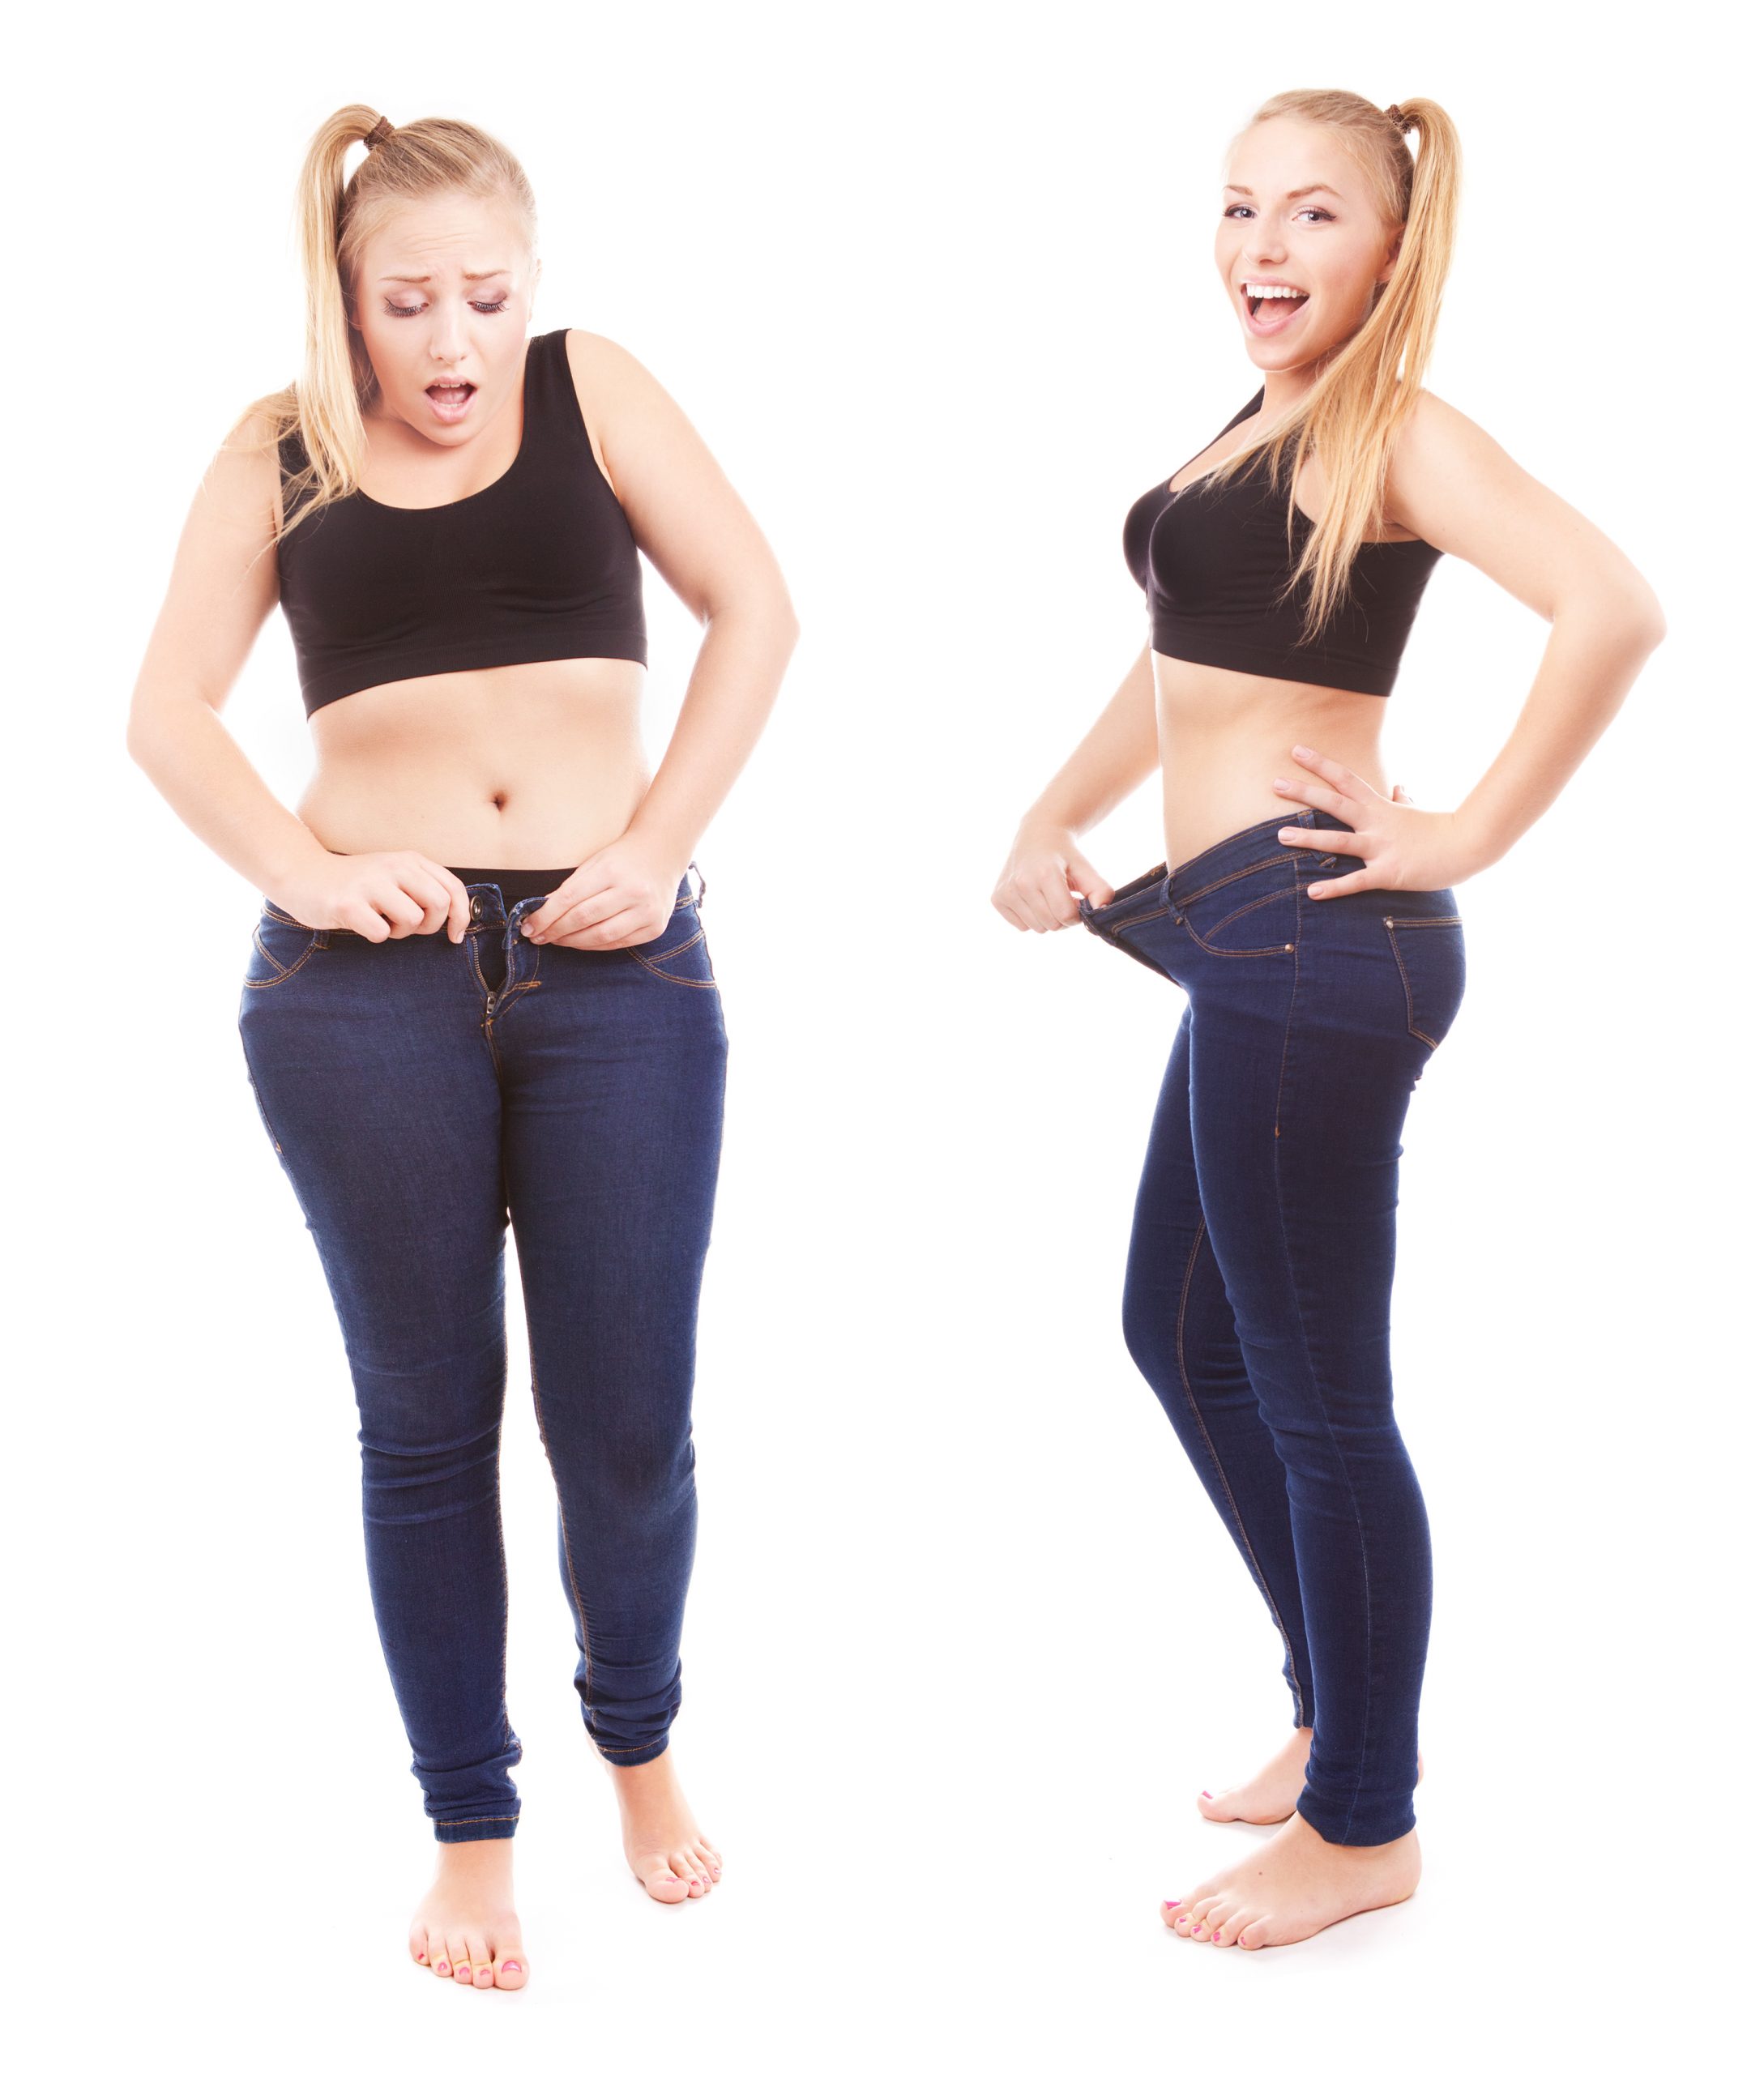 Before and after a diet, girl is happy by achievement